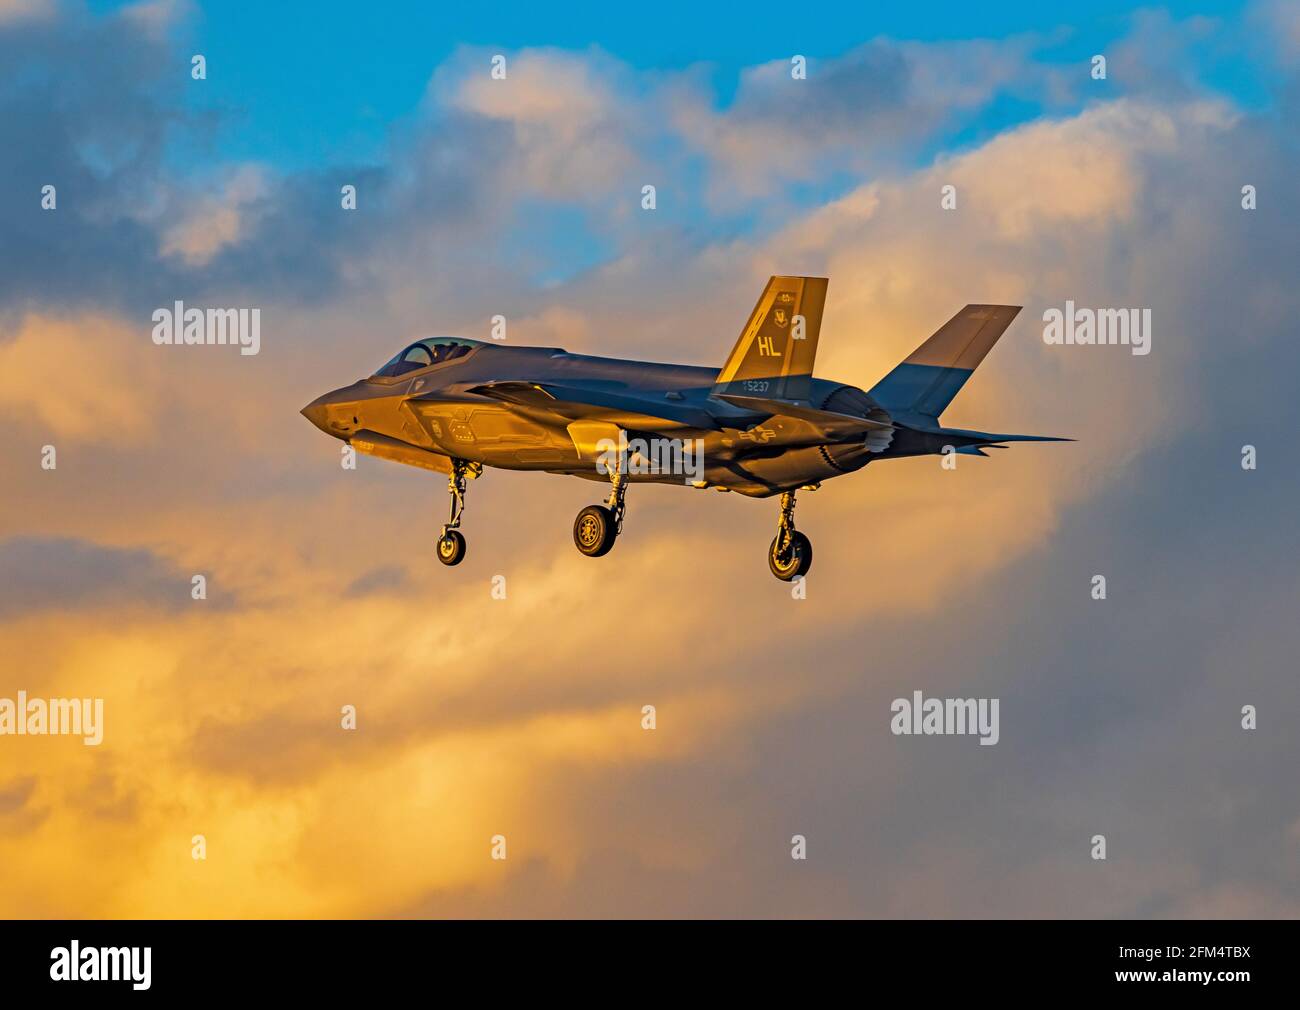 An F-35A Lightning II prepares to land in the golden light of the setting sun at Hill Air Force Base, Layton, Davis County, Utah; USA; Stock Photo